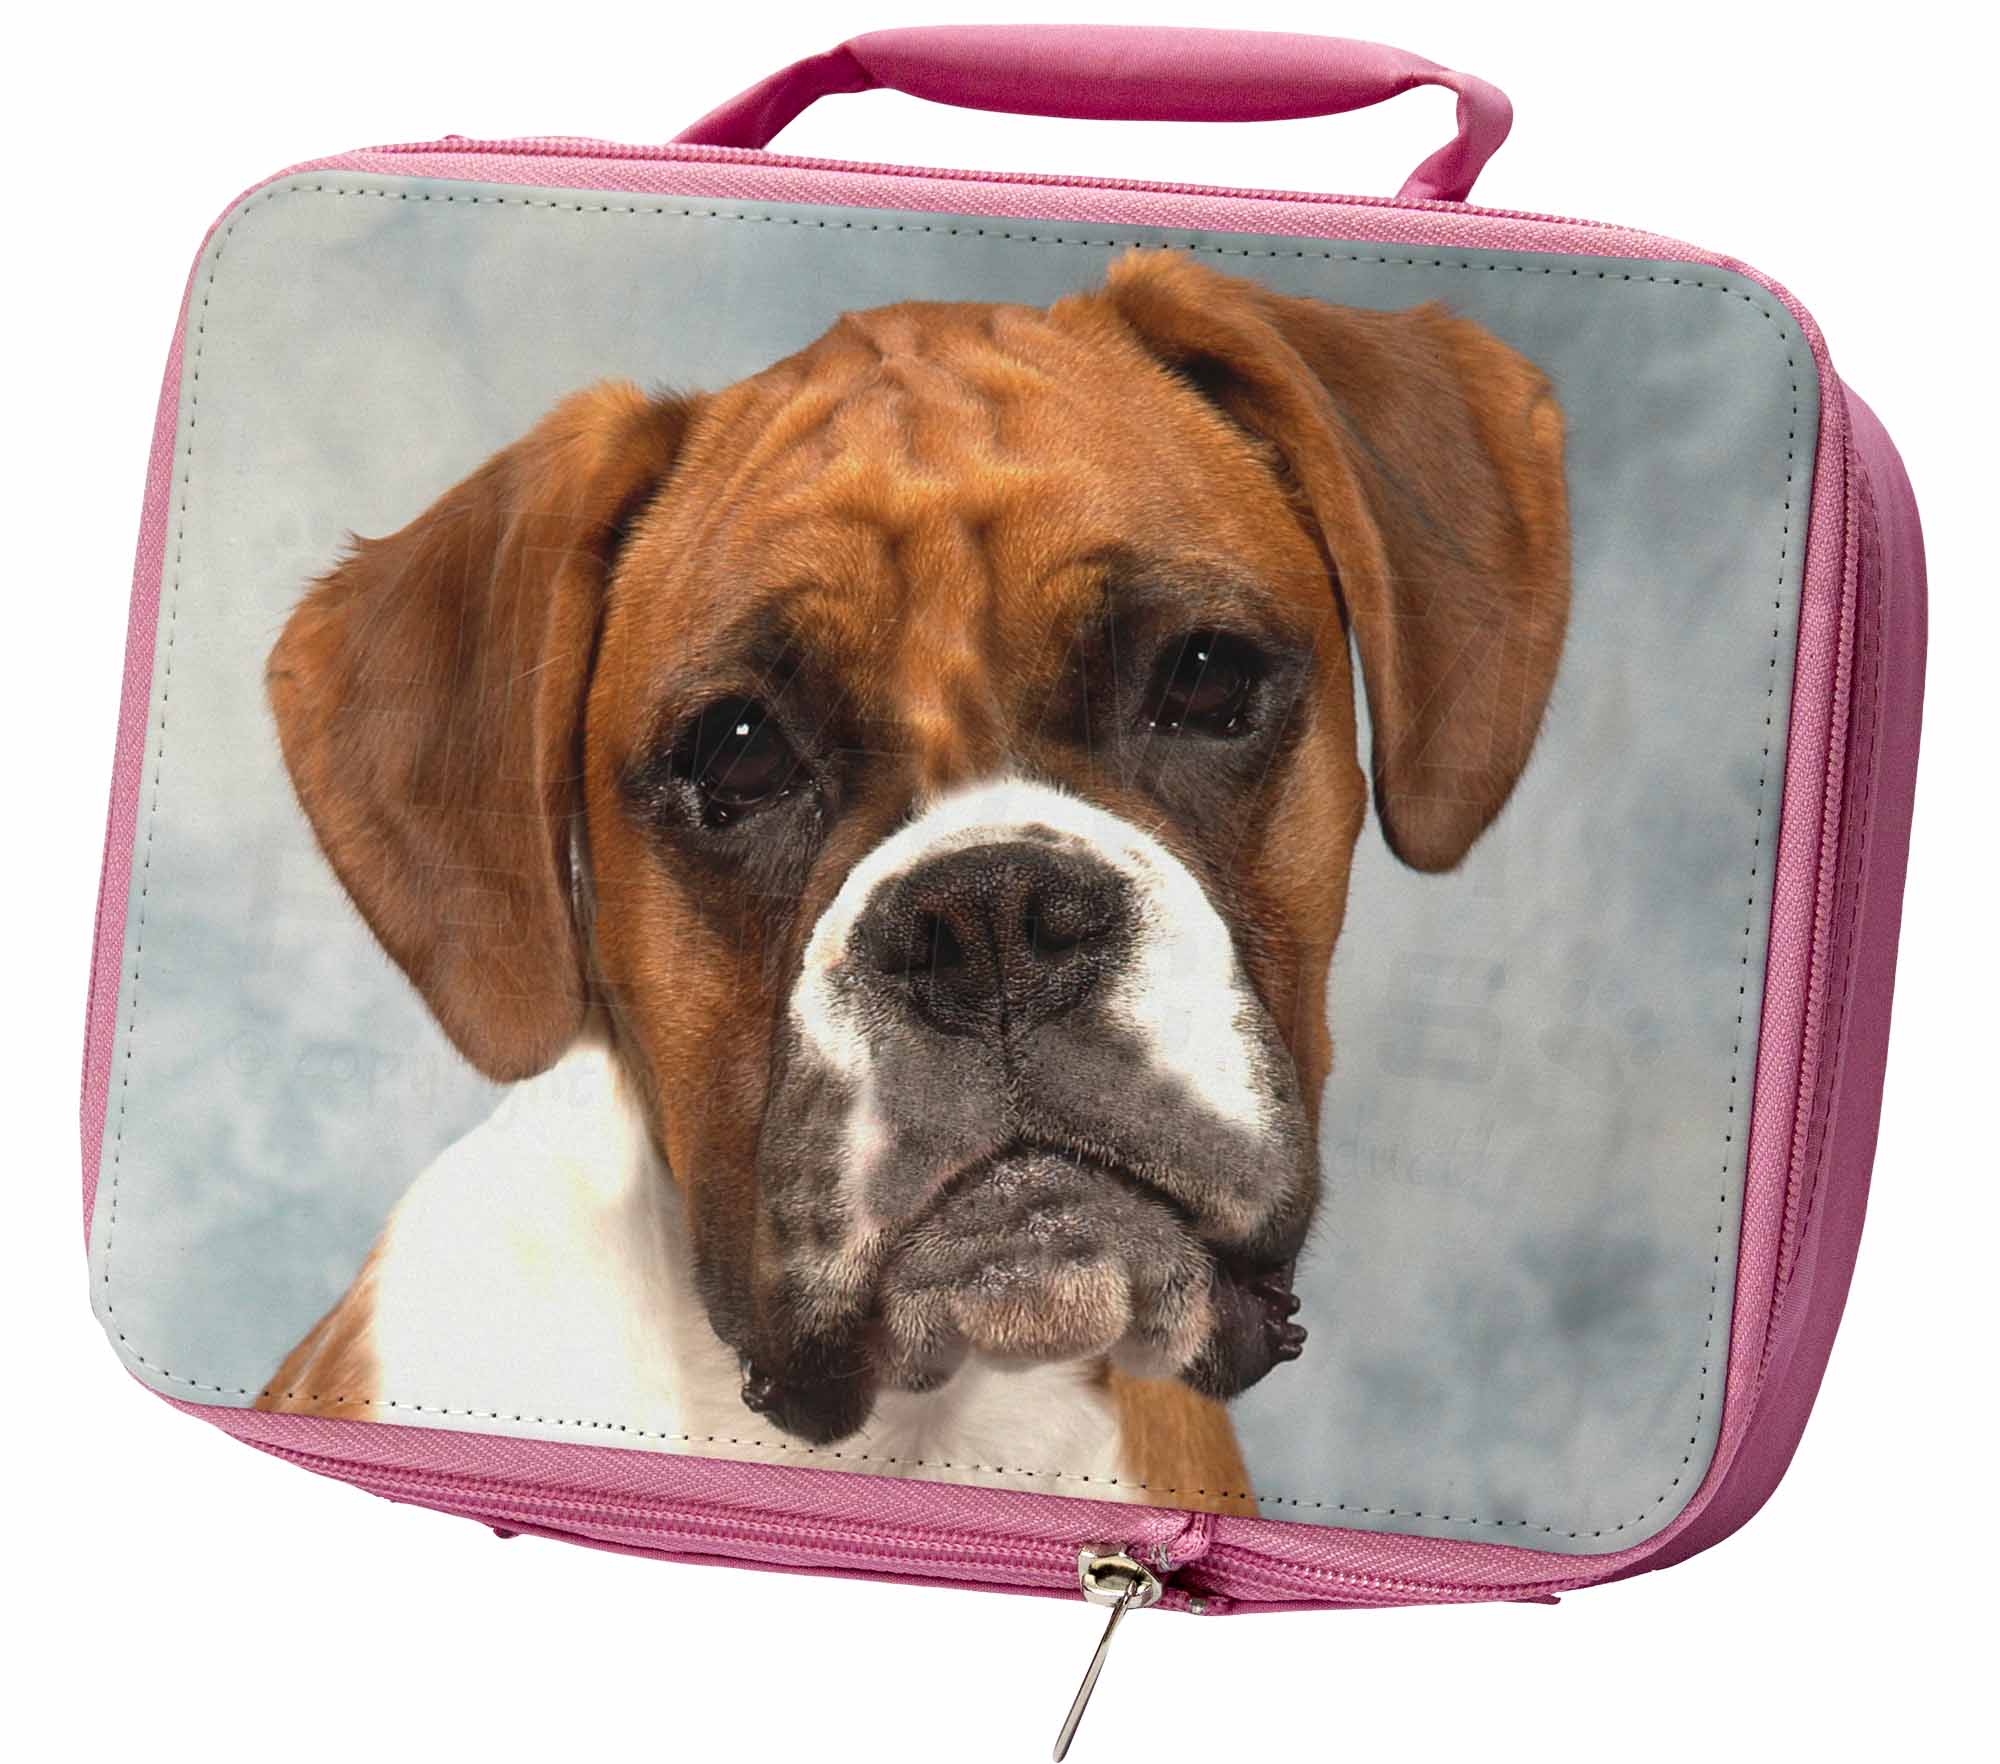 Boxer Dog Puppy Insulated Pink School Lunch Box Bag AD-B40LBP 